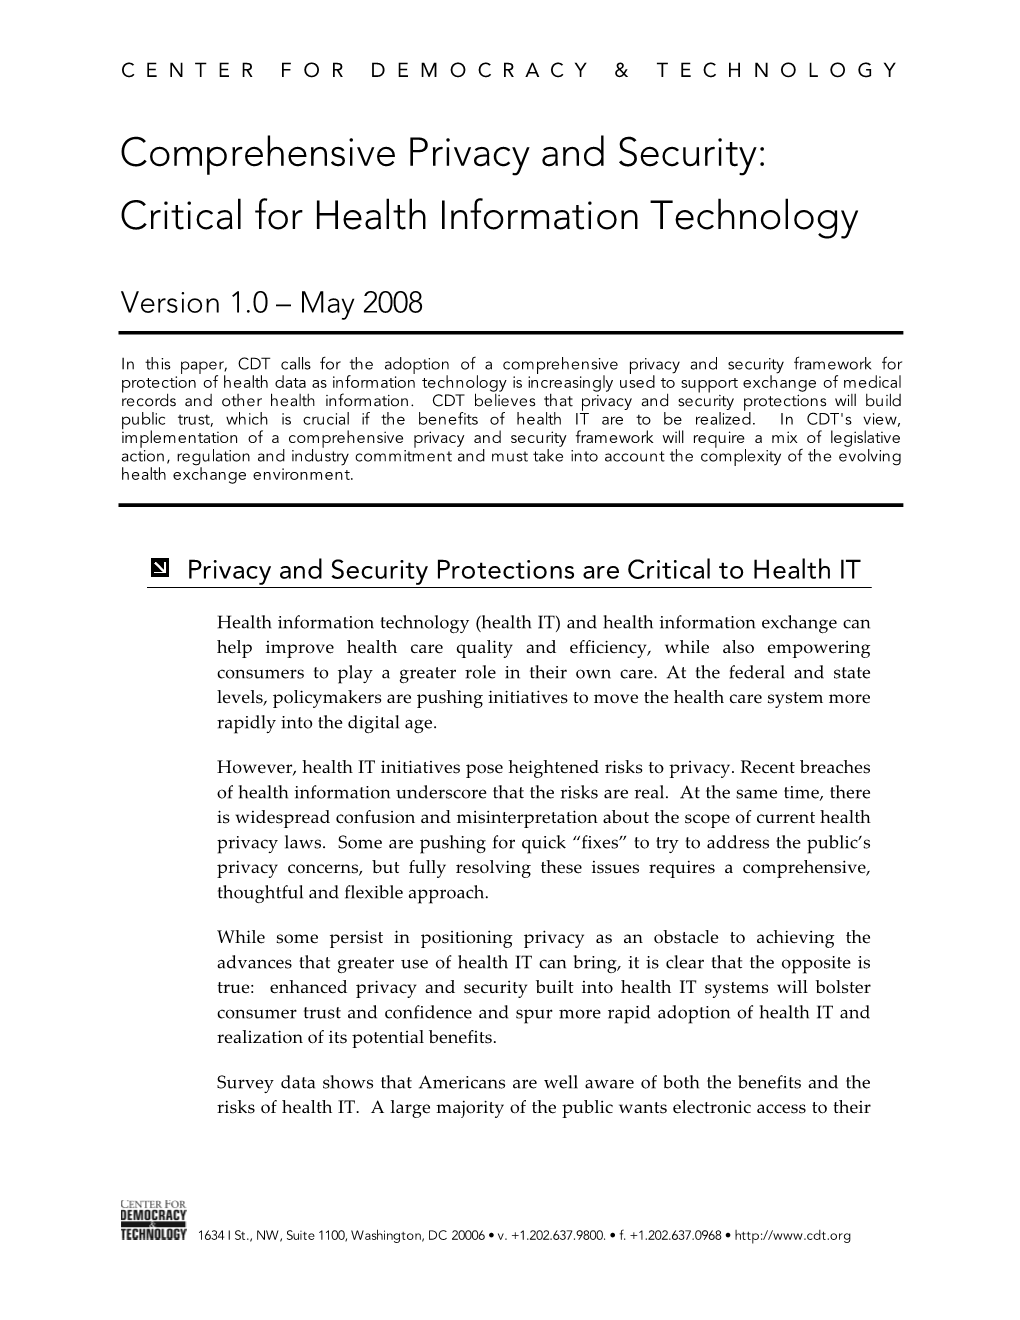 Comprehensive Privacy and Security: Critical for Health Information Technology